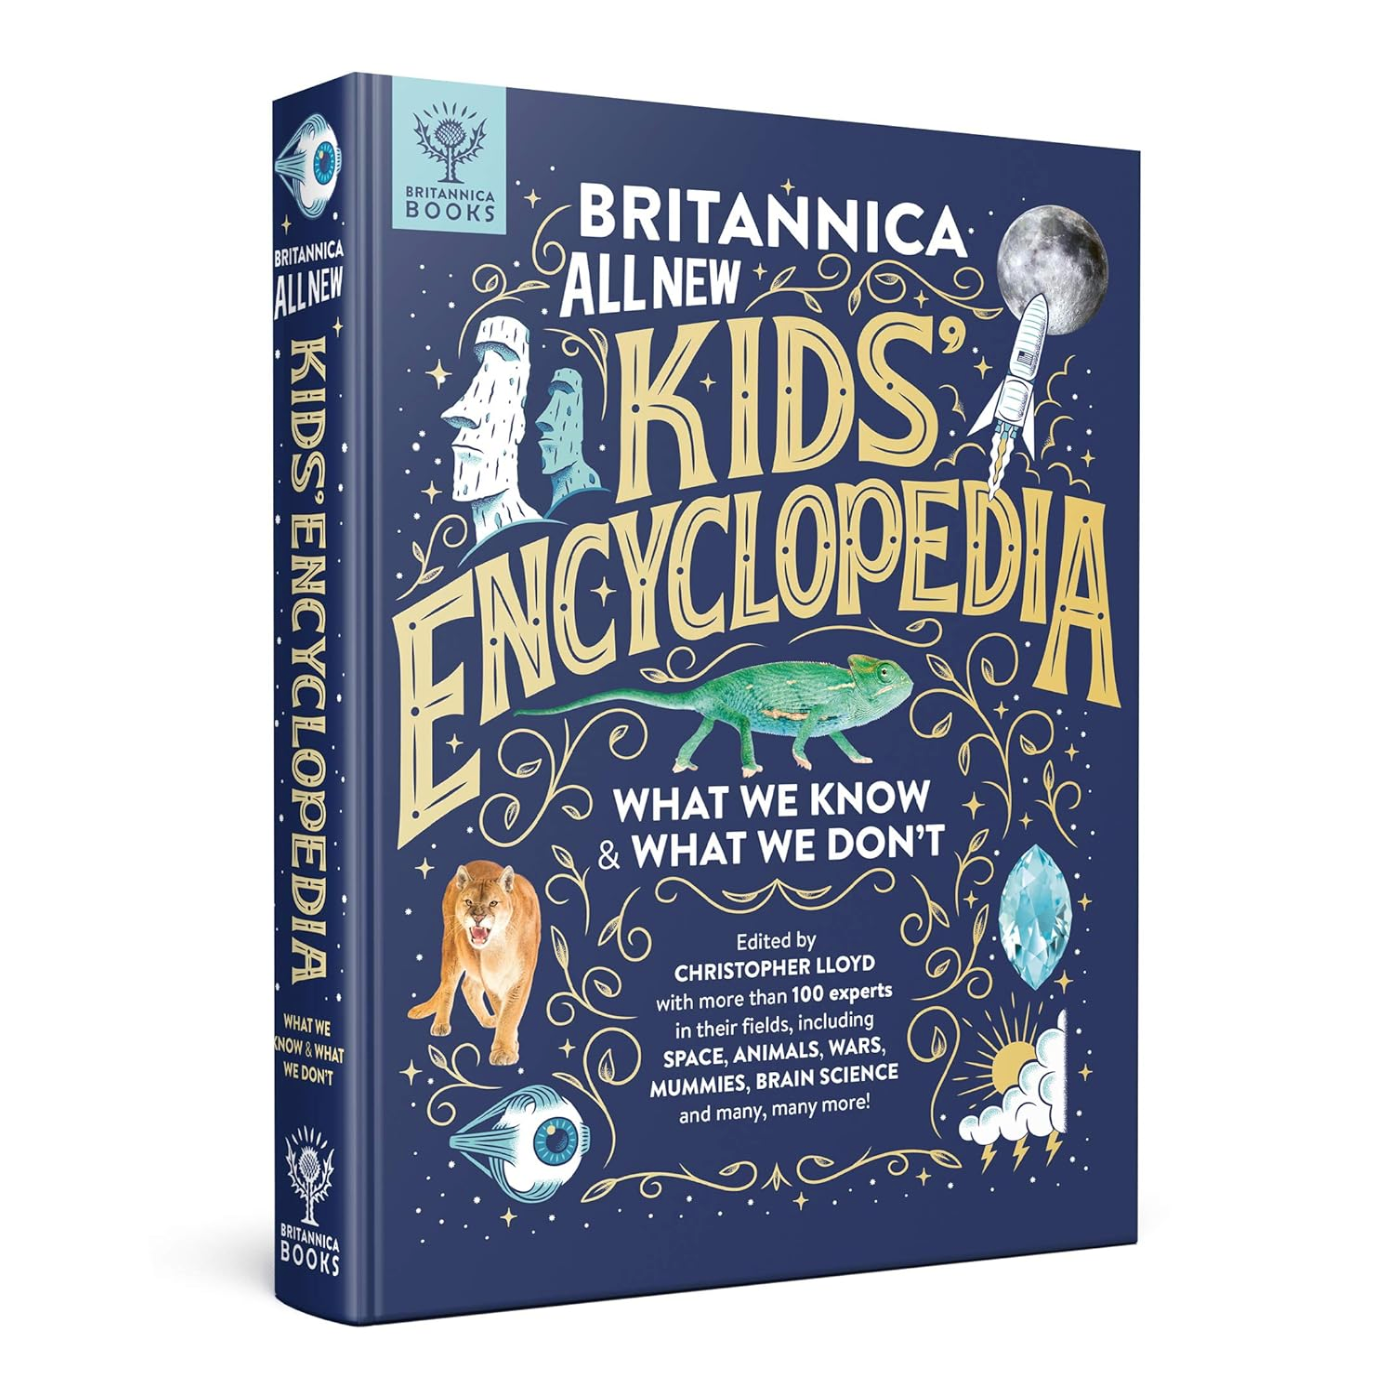 Britannica Kids Encyclopedia: What We Know